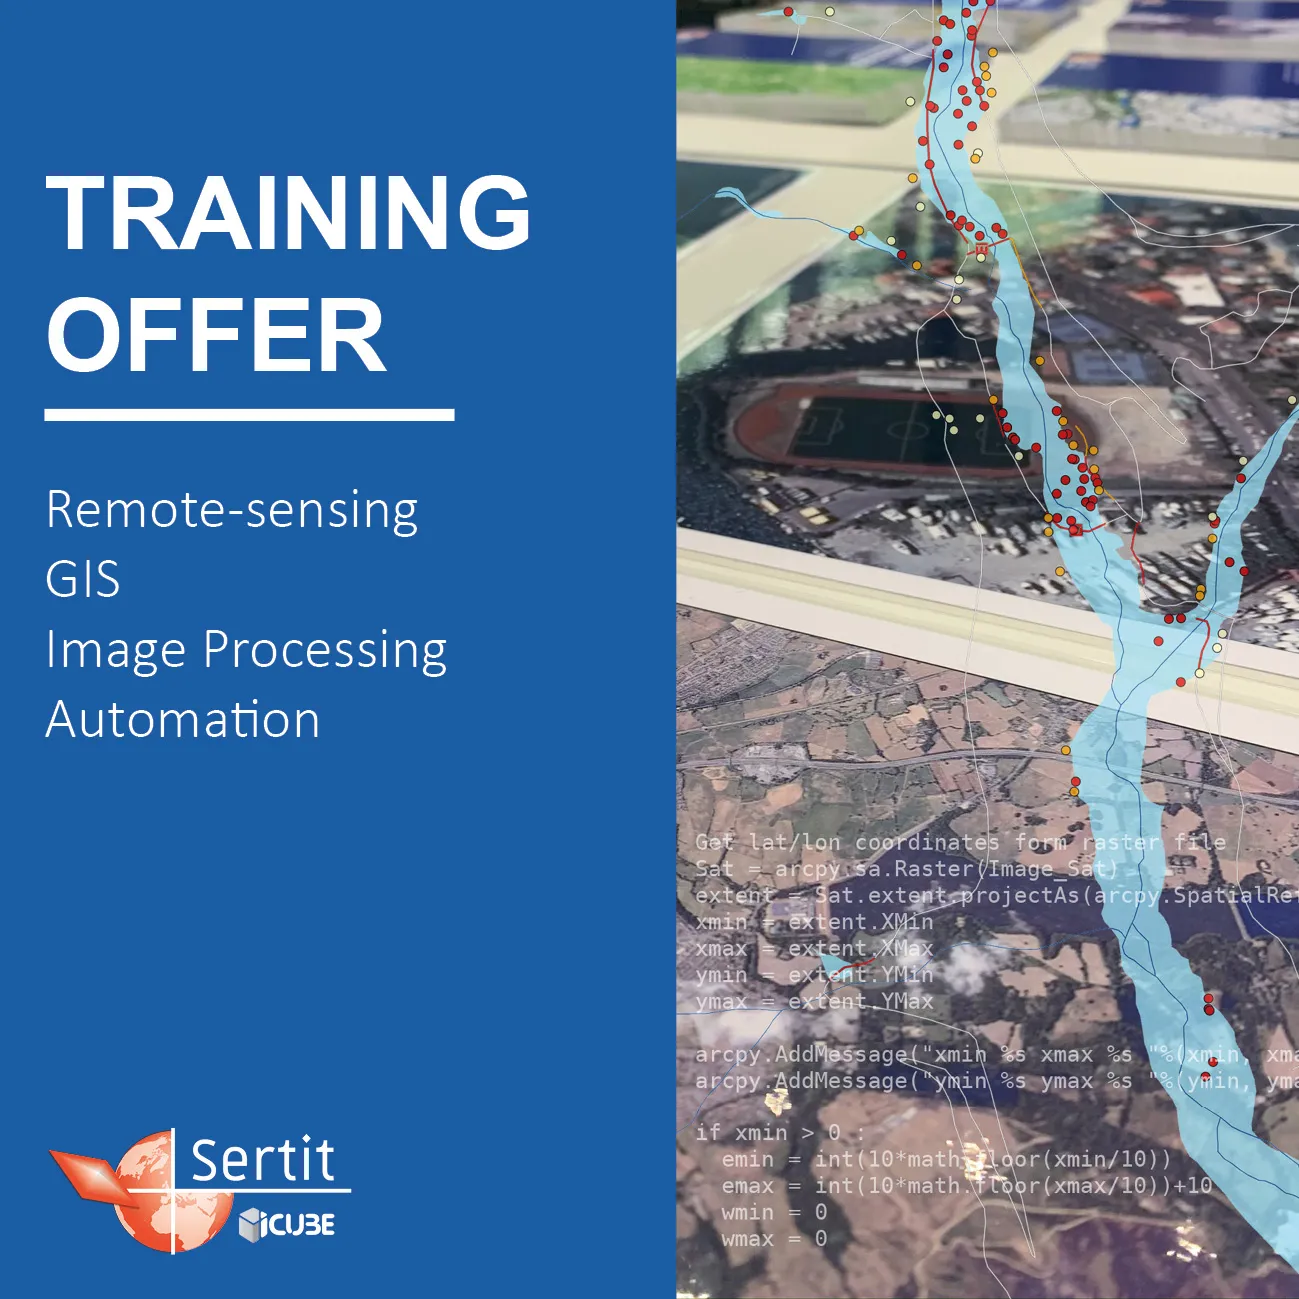 Training Offer: Remote-sensing, GIS, Image Processing, Automation